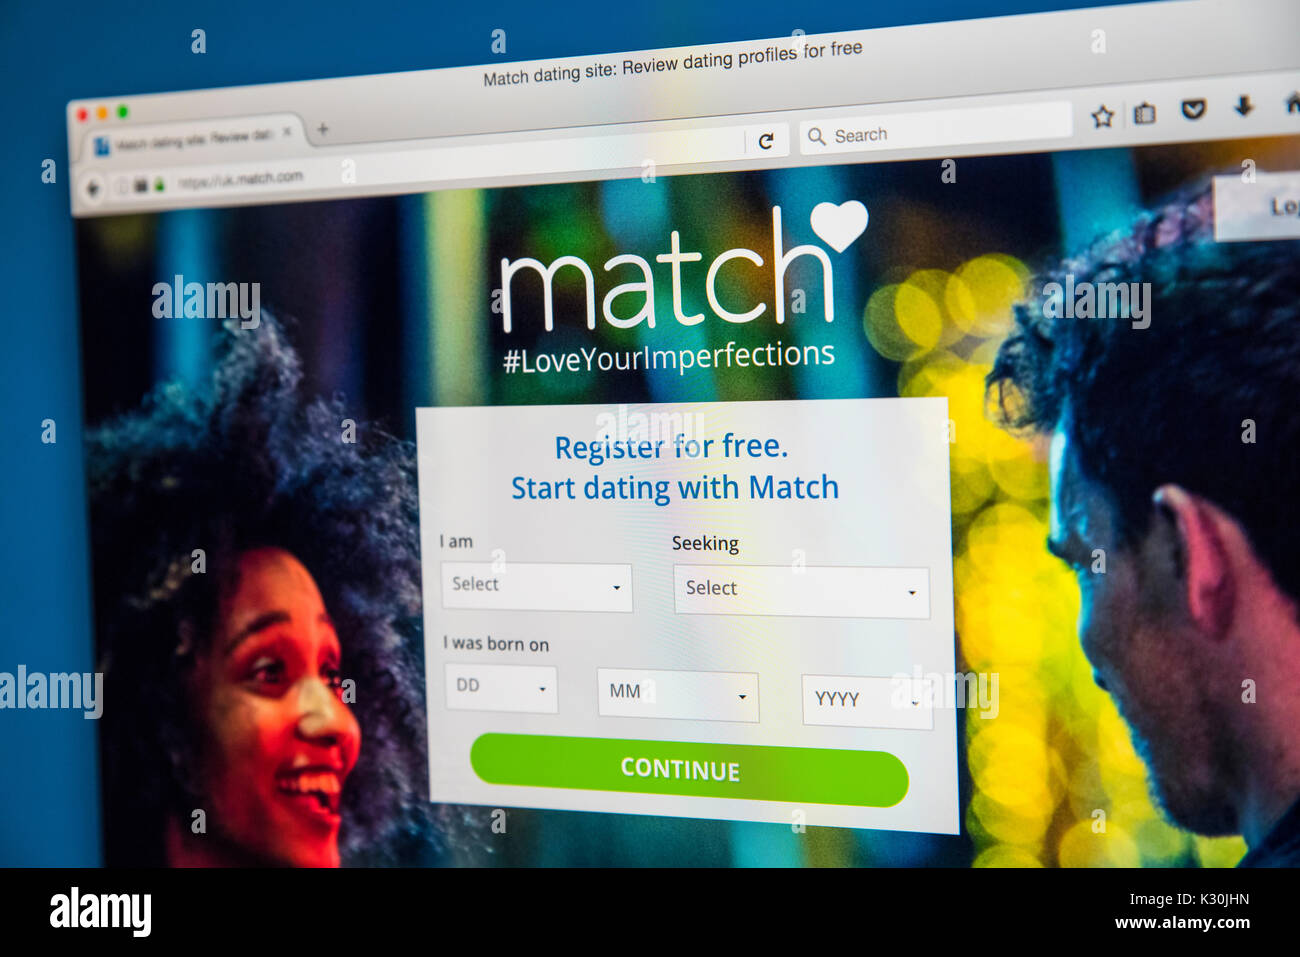 Dating Match картинки. Match.com. Select services dating Reviews.